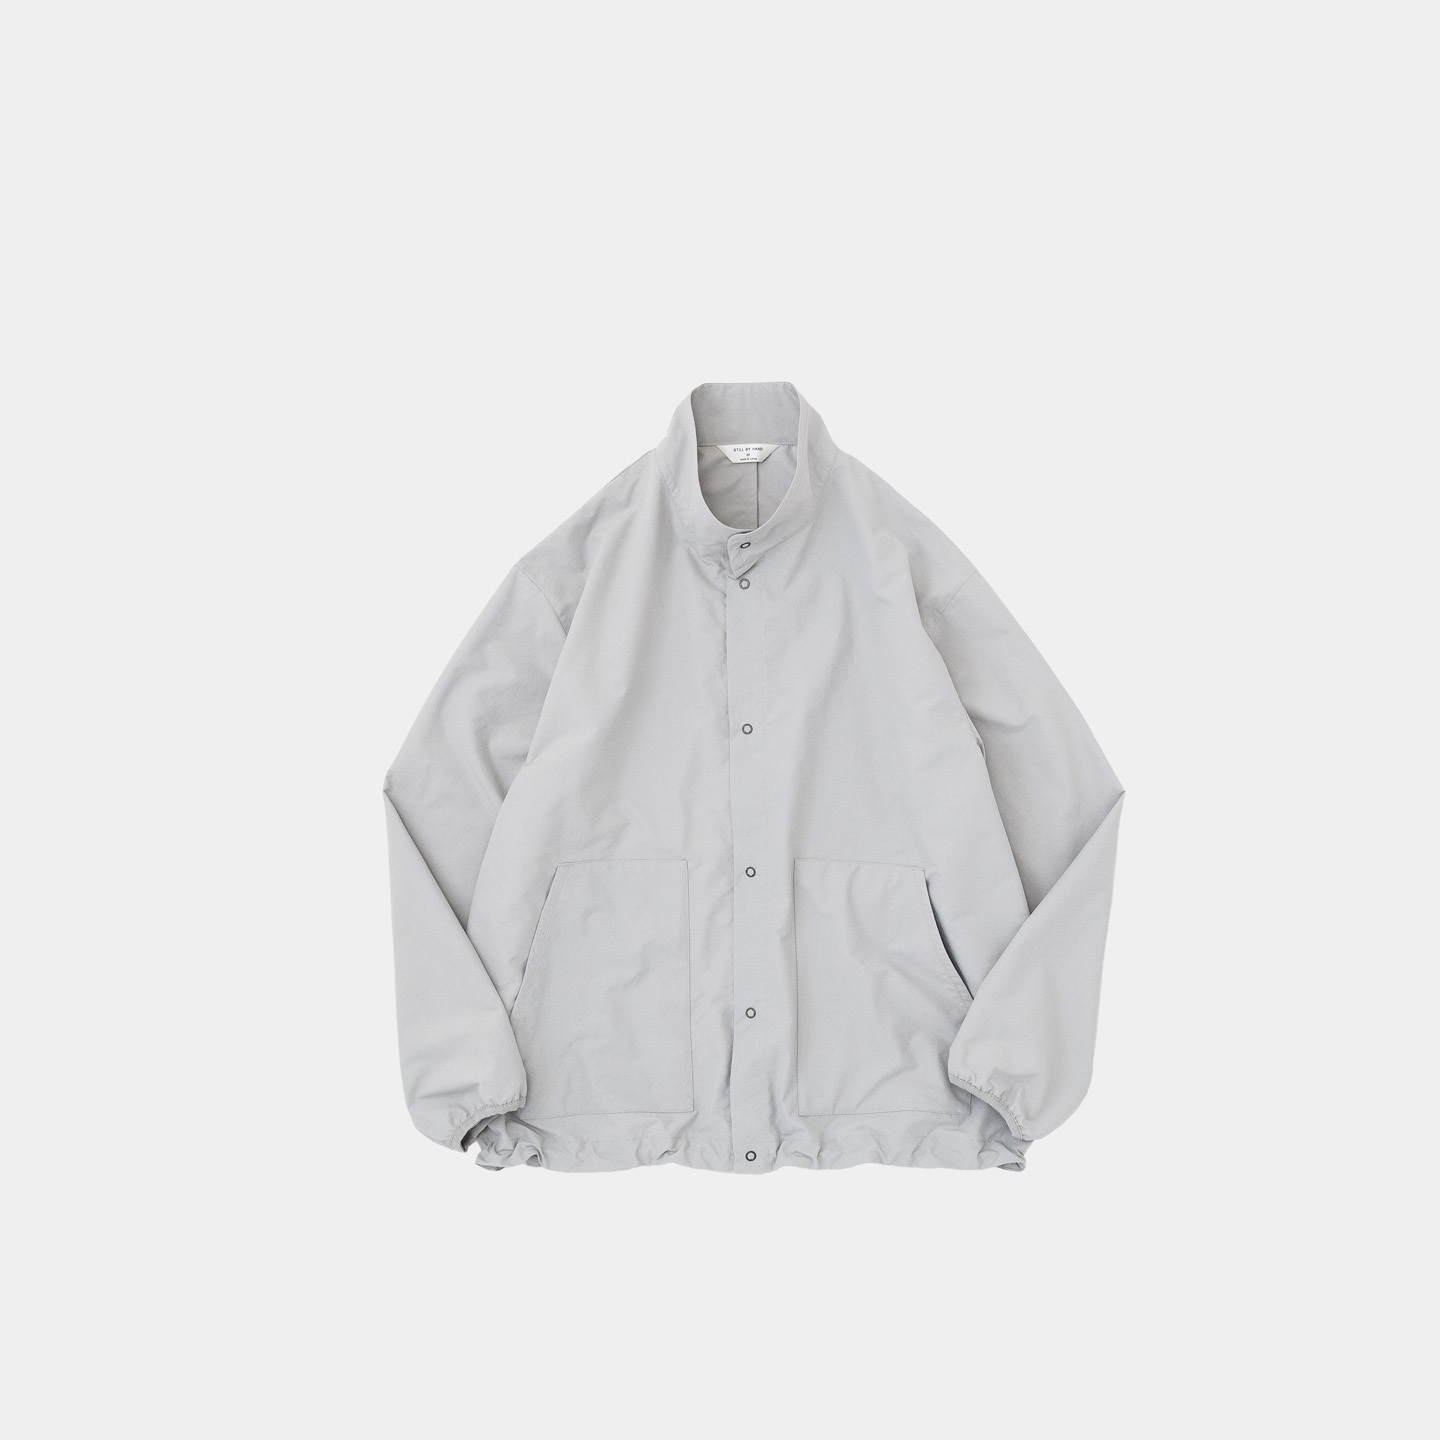 STILL BY HAND - STAND COLLAR BLOUSON / 2COLORS